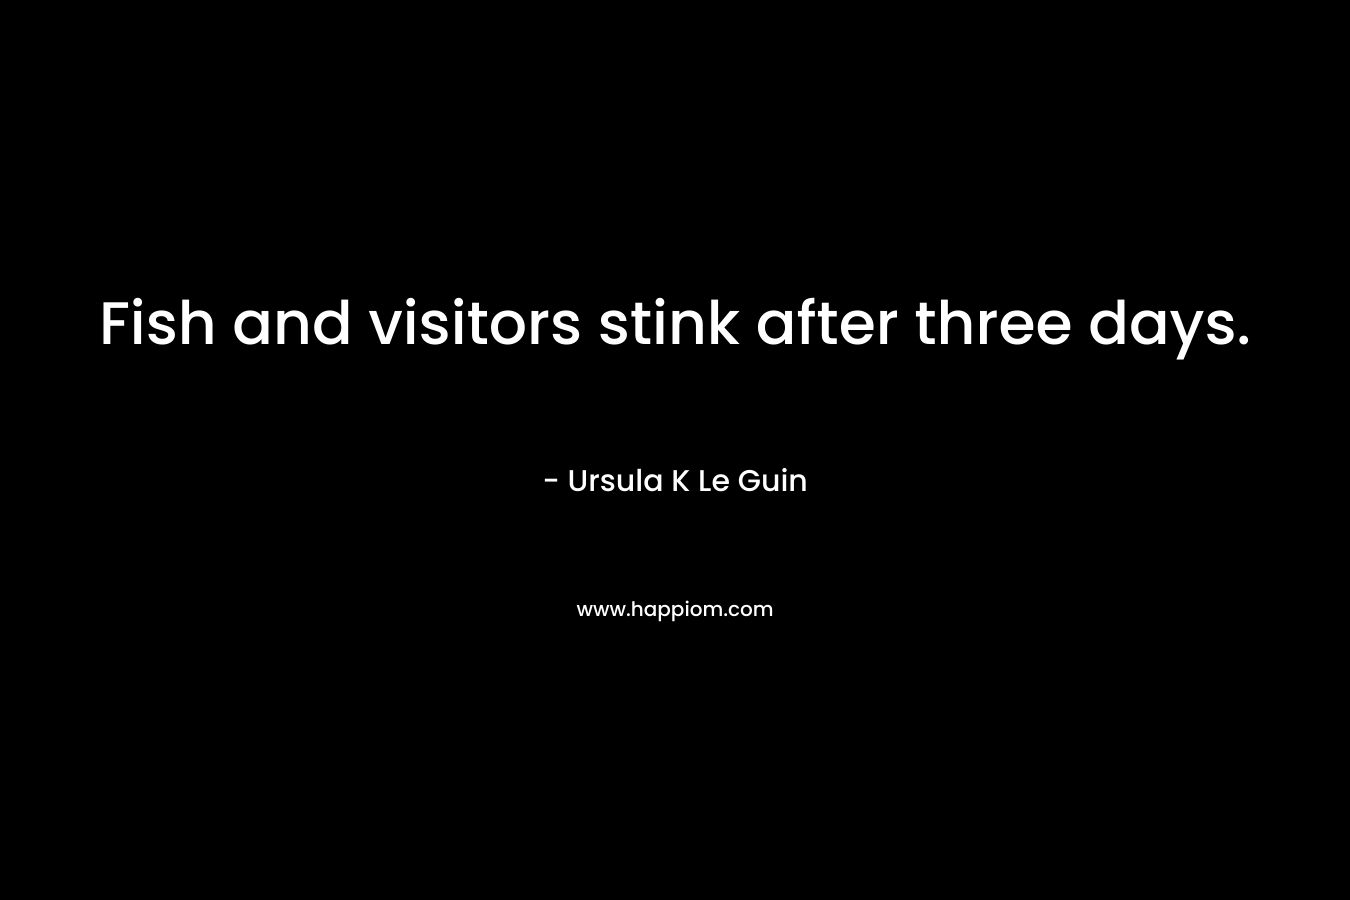 Fish and visitors stink after three days. – Ursula K Le Guin